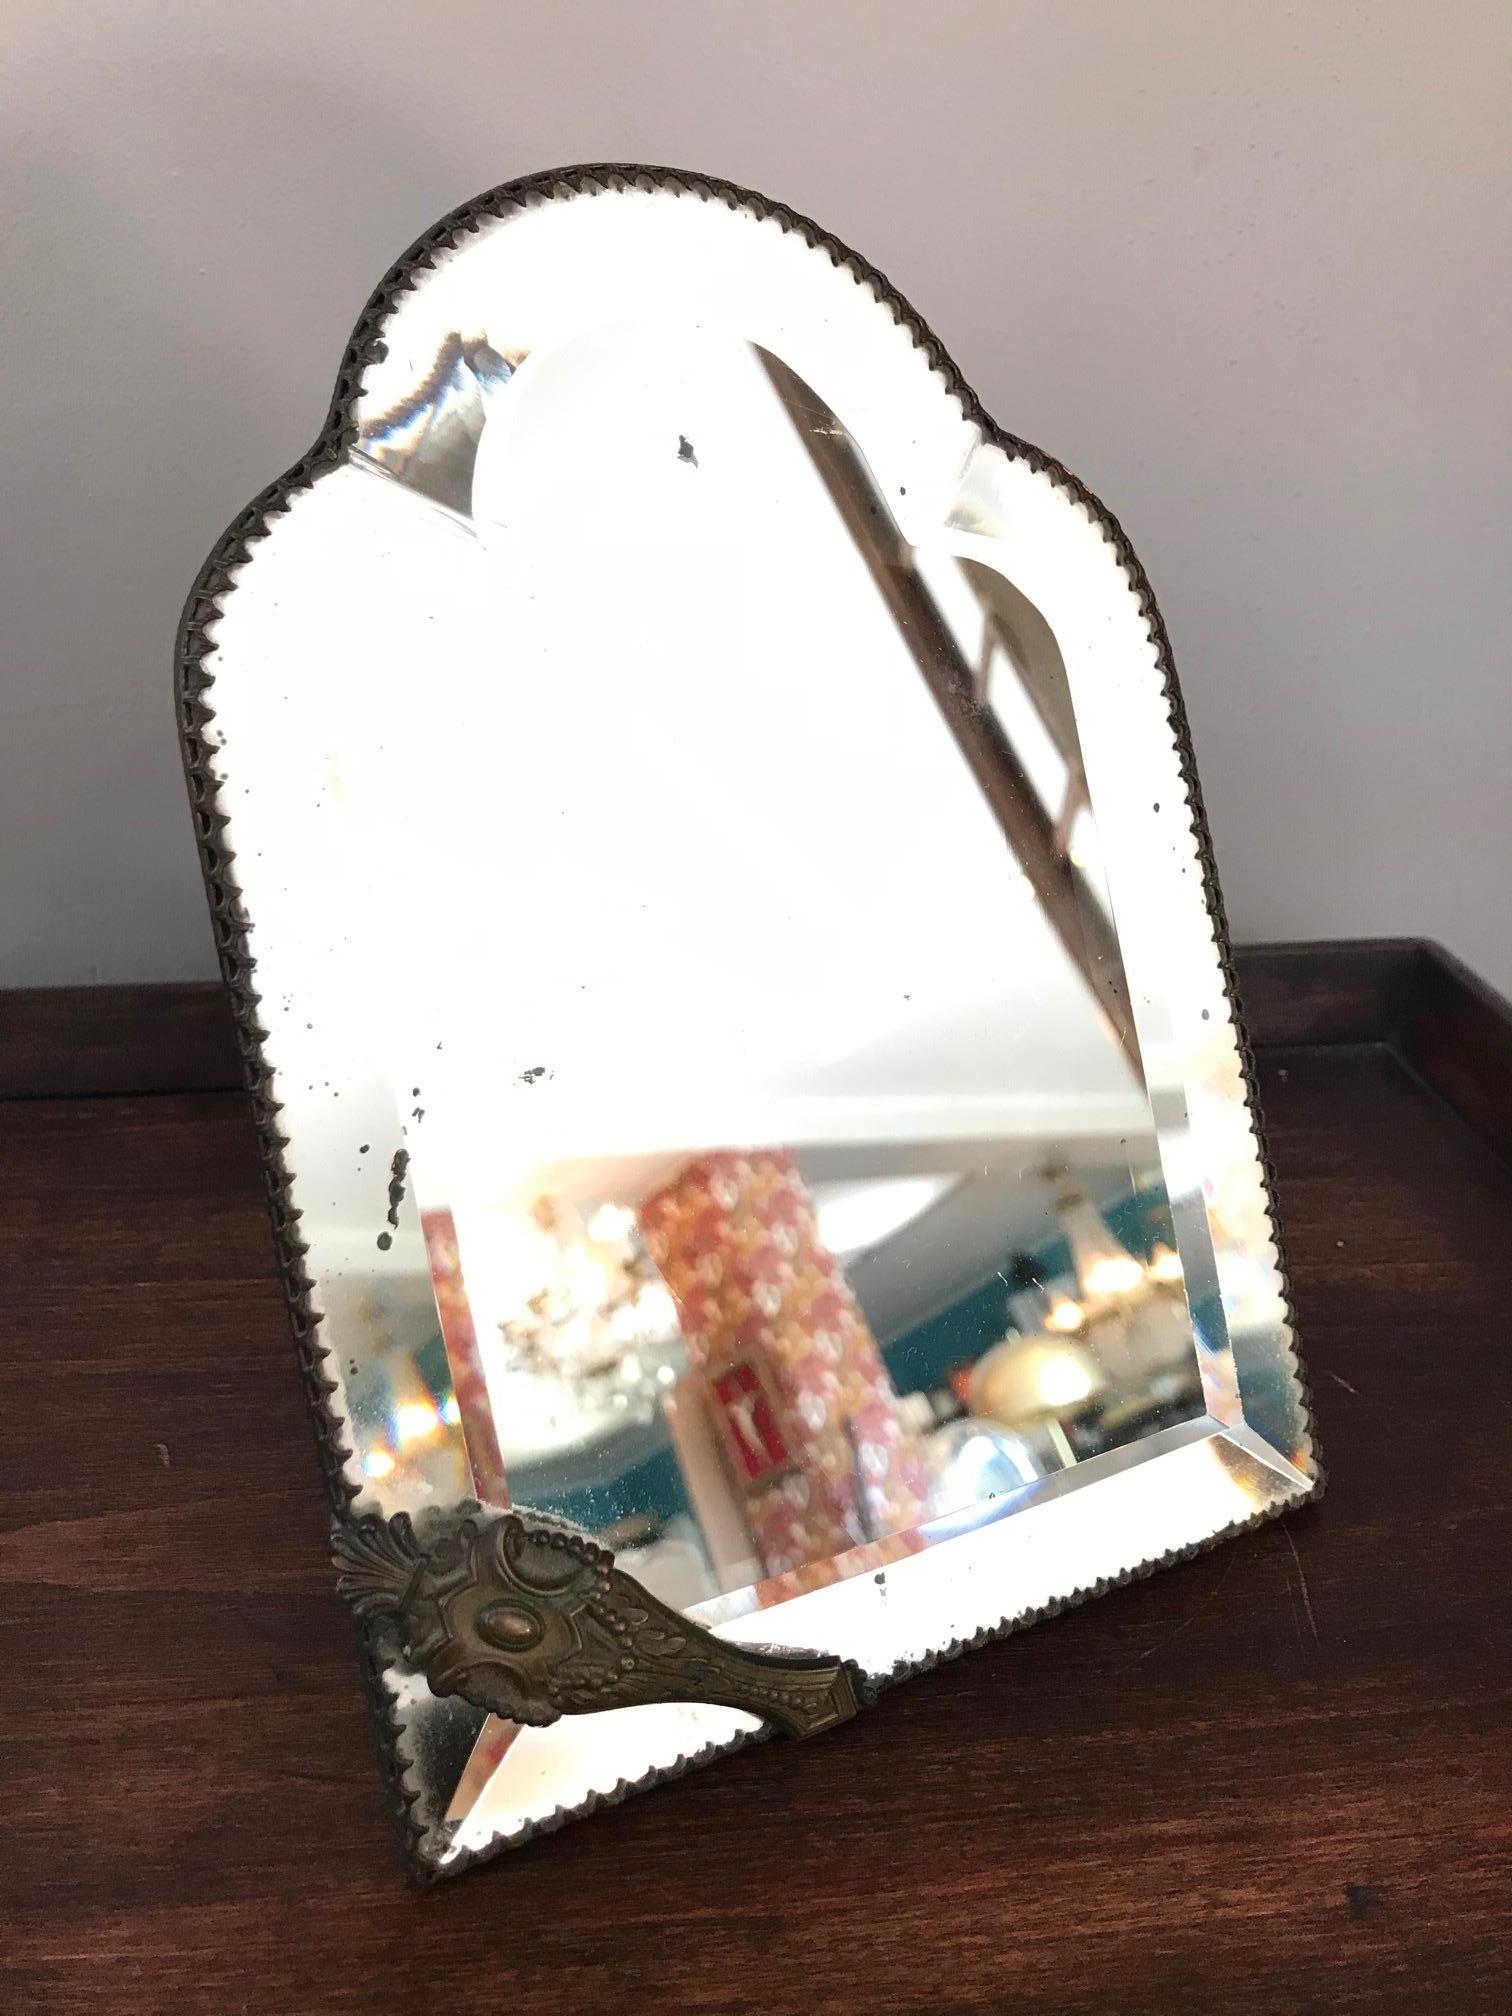 Beautiful 20th century French Napoleon III Period table mirror.
Beveled mirror with a nice rounded shape and a decoration at the corner.
The foot to hold the mirror is well decorated too.
Nice quality.